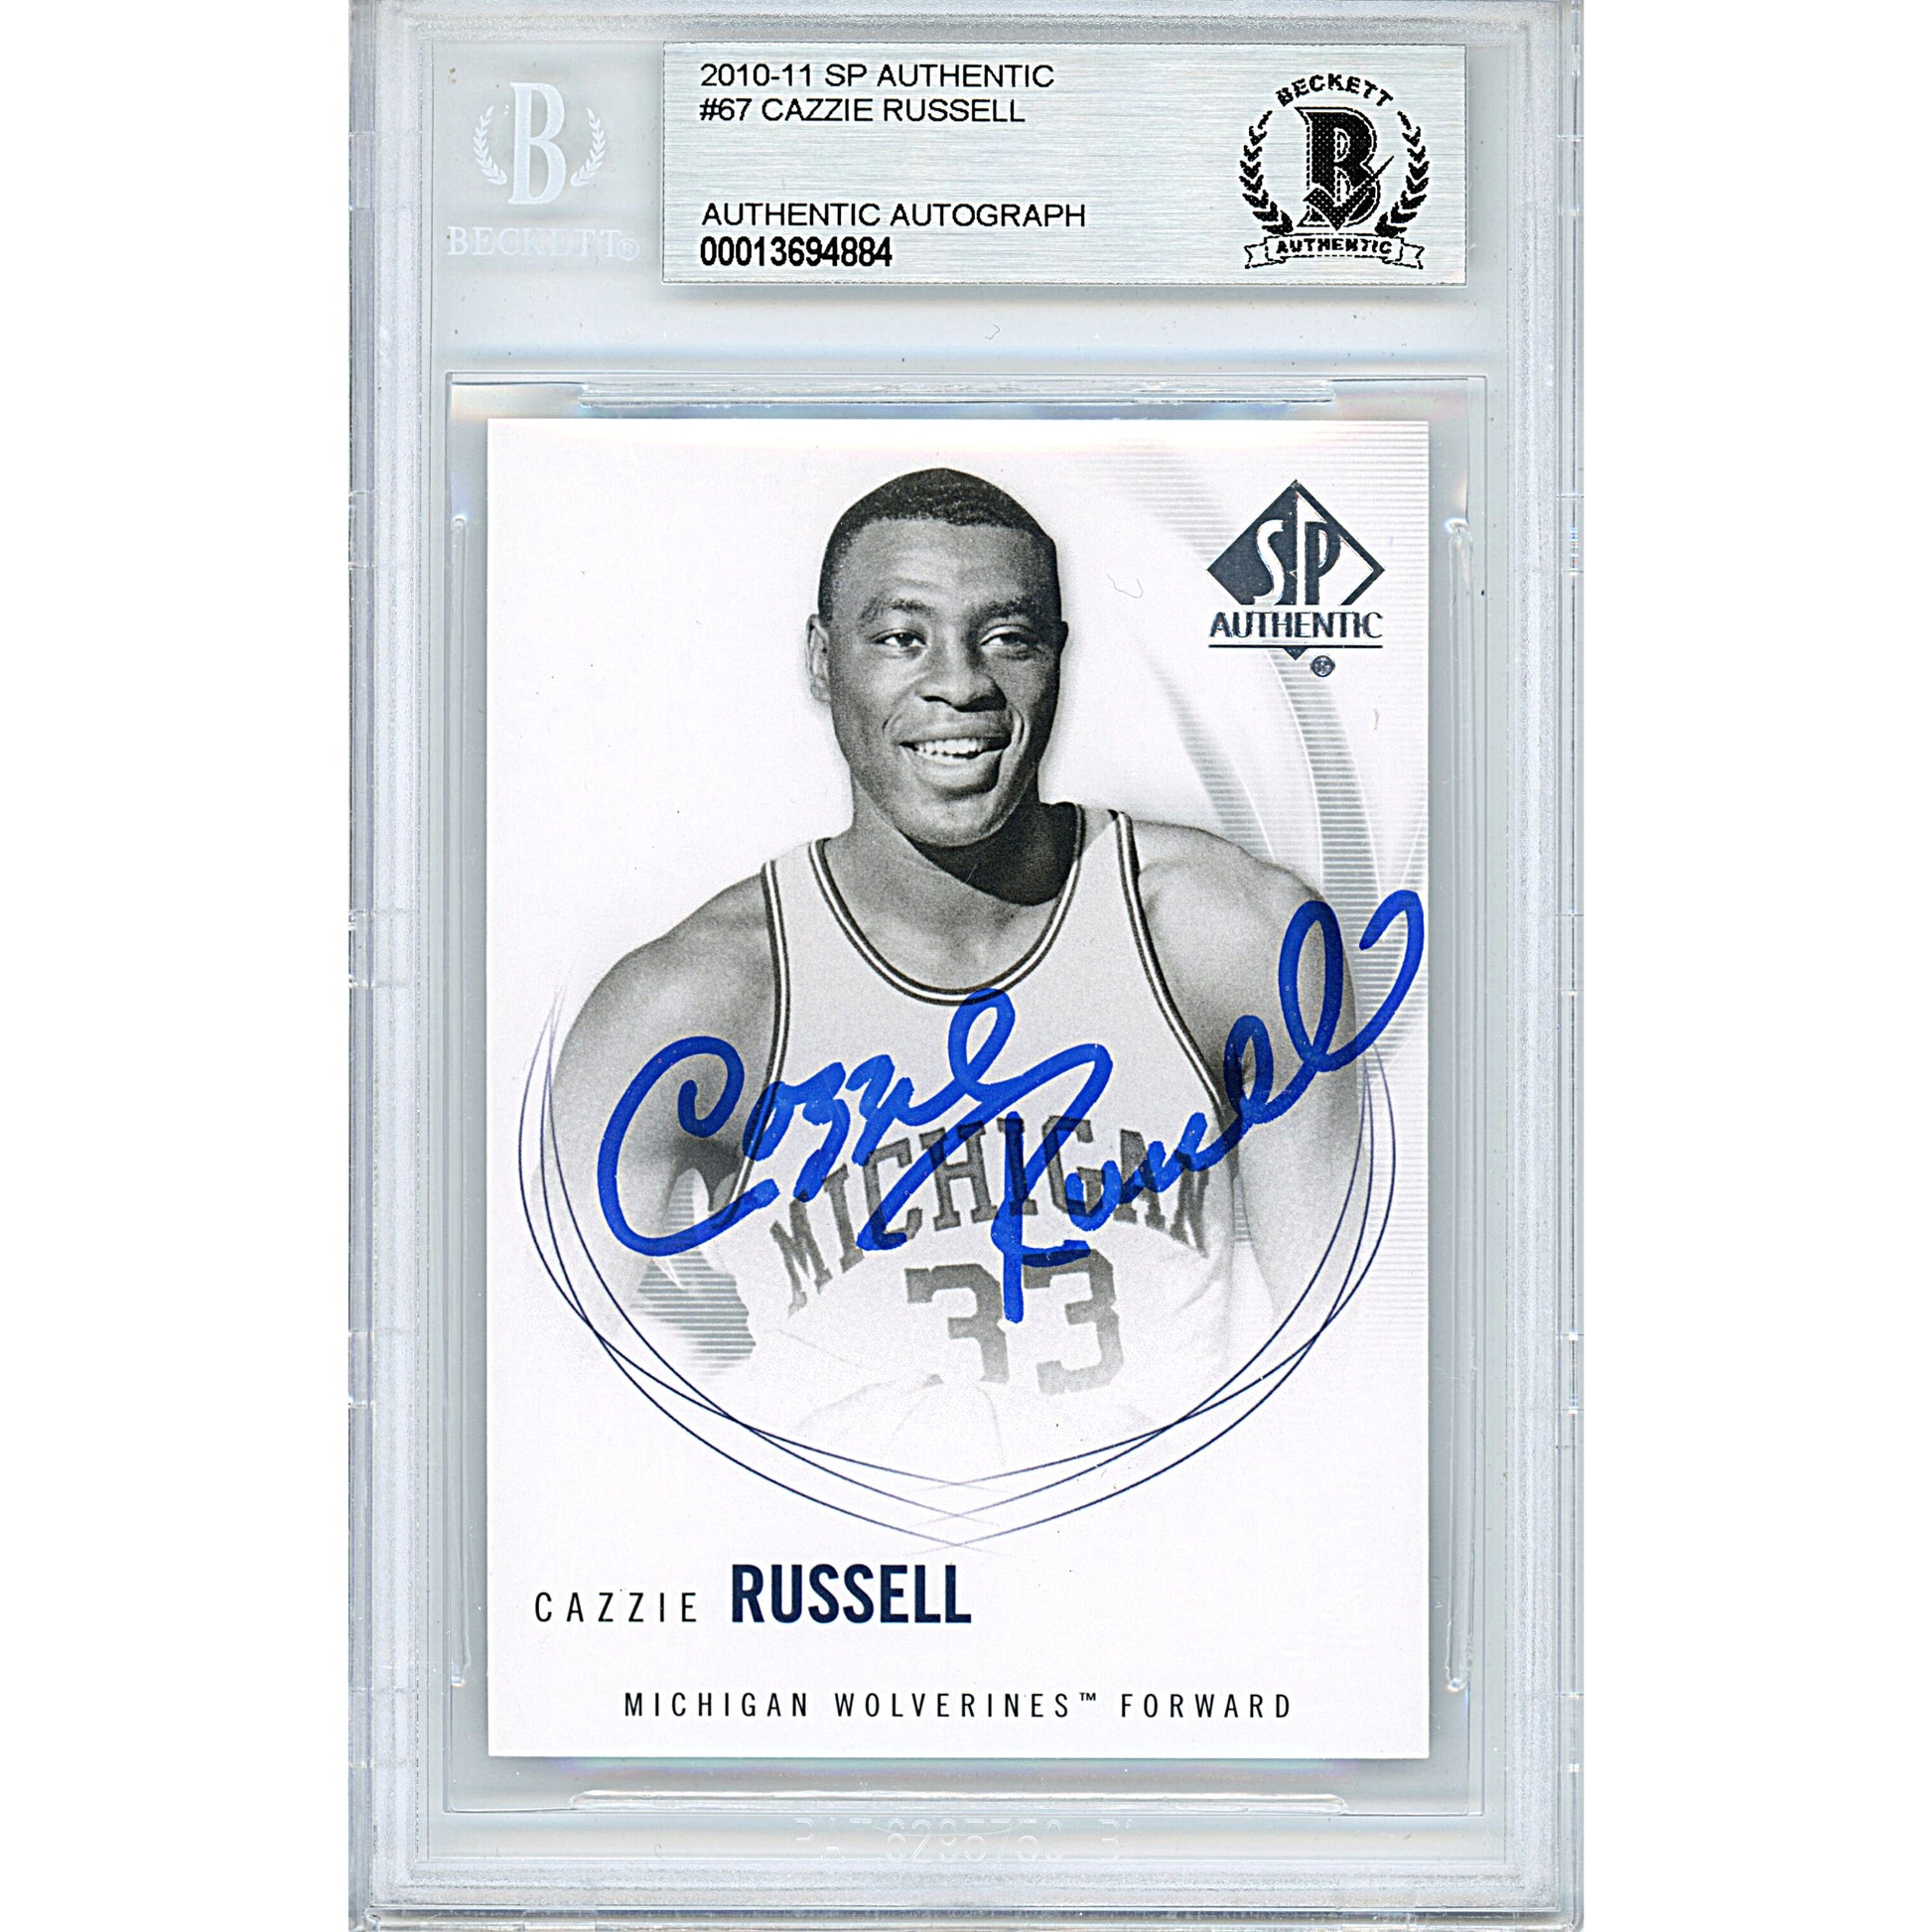 Basketballs- Autographed- Cazzie Russell Signed Michigan Wolverines 2010-2011 Upper Deck SP Authentic Basketball Card Beckett BAS Slabbed 00013694884 - 101